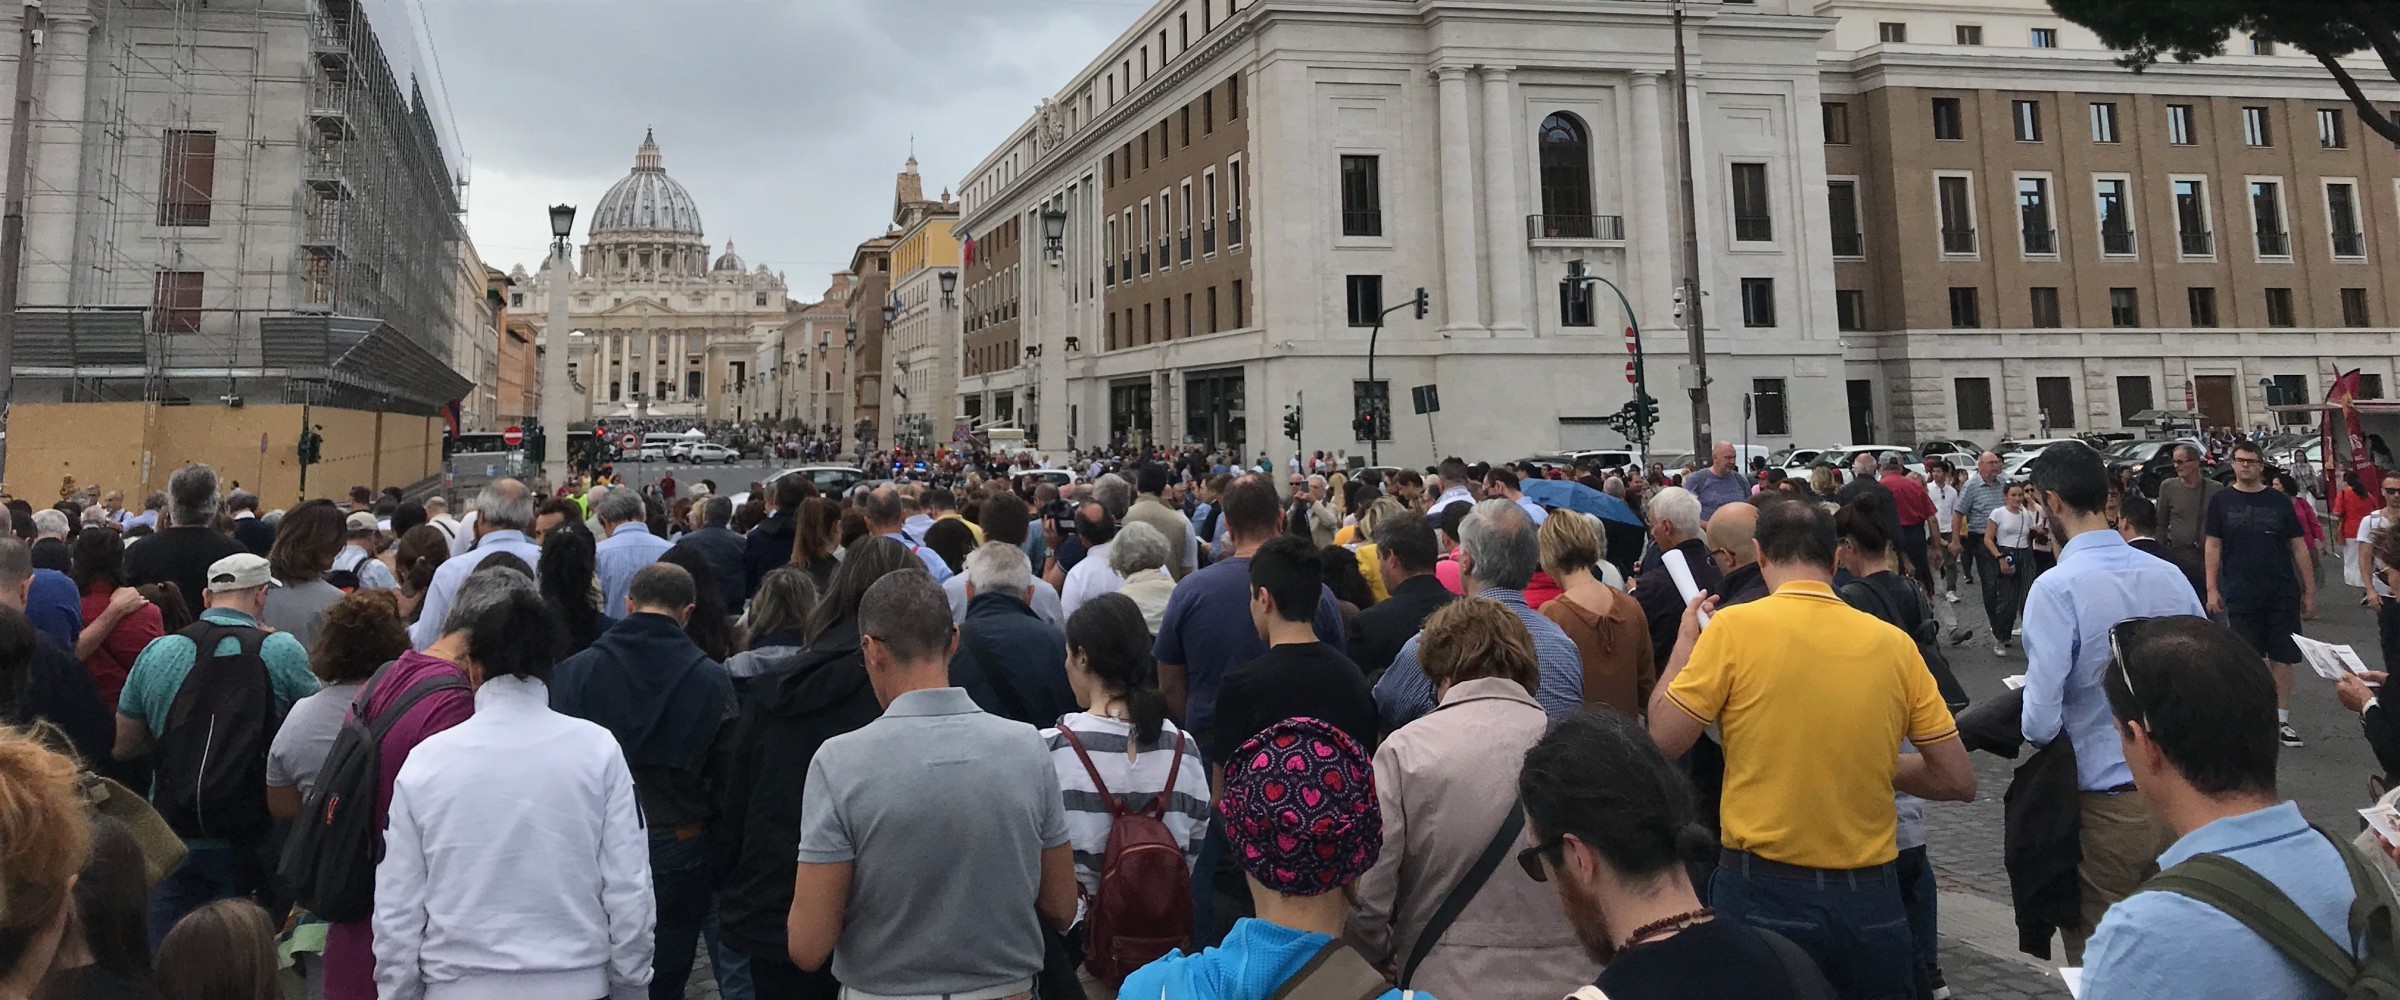 Faithful Gather in Rome to Pray for a Church in ‘Crisis’| National ...